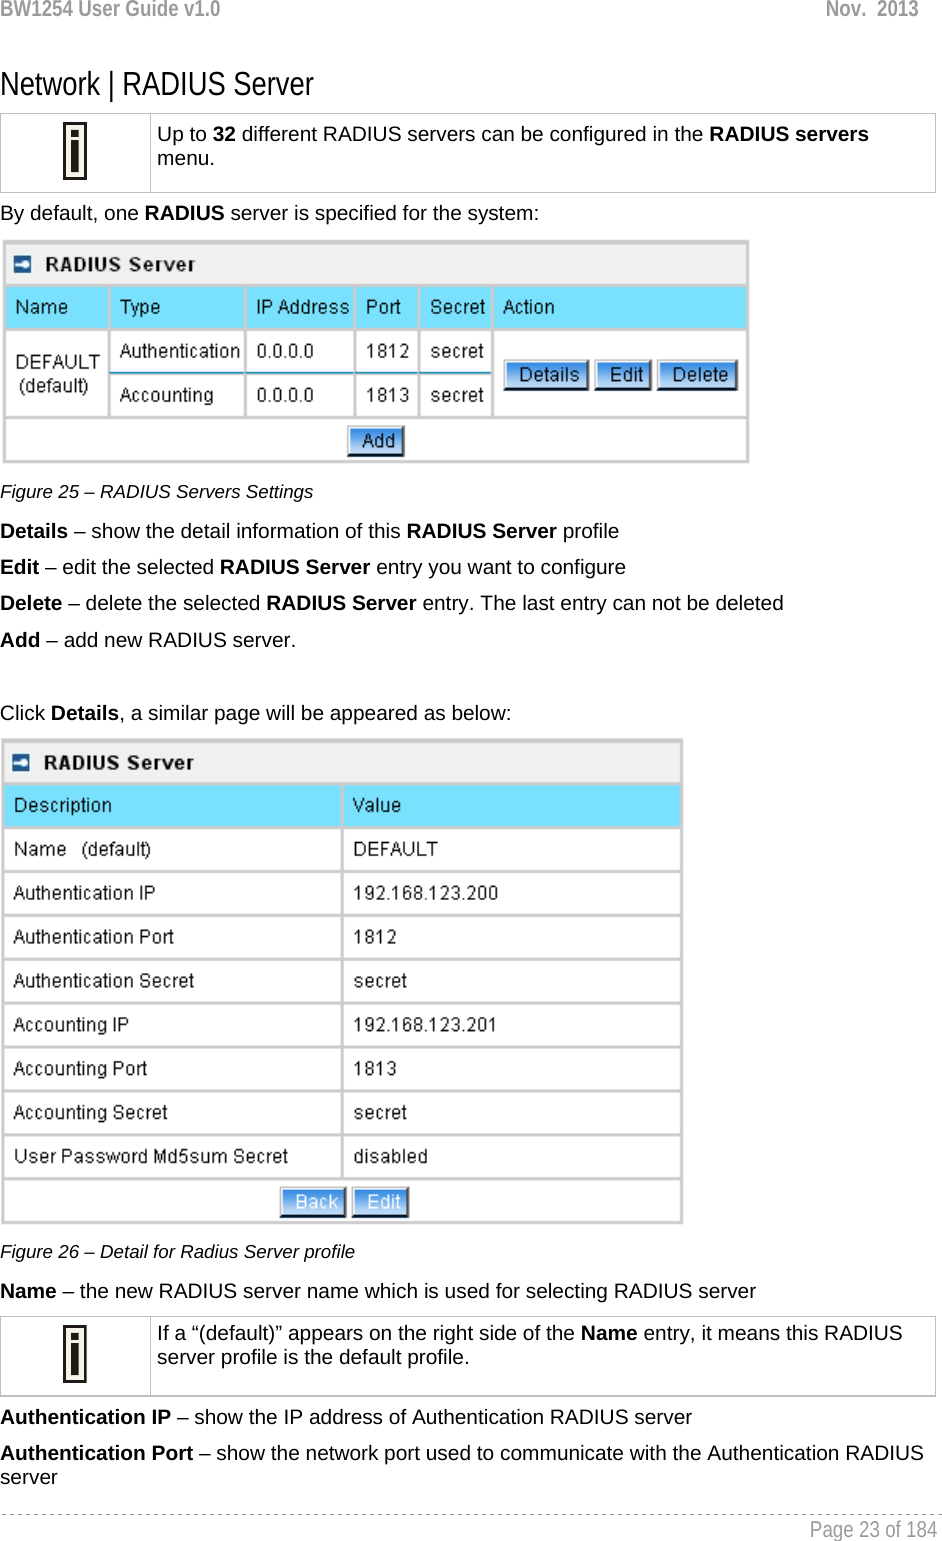 BW1254 User Guide v1.0  Nov.  2013     Page 23 of 184   Network | RADIUS Server  Up to 32 different RADIUS servers can be configured in the RADIUS servers menu. By default, one RADIUS server is specified for the system:  Figure 25 – RADIUS Servers Settings Details – show the detail information of this RADIUS Server profile Edit – edit the selected RADIUS Server entry you want to configure Delete – delete the selected RADIUS Server entry. The last entry can not be deleted Add – add new RADIUS server.  Click Details, a similar page will be appeared as below:  Figure 26 – Detail for Radius Server profile Name – the new RADIUS server name which is used for selecting RADIUS server  If a “(default)” appears on the right side of the Name entry, it means this RADIUS server profile is the default profile. Authentication IP – show the IP address of Authentication RADIUS server Authentication Port – show the network port used to communicate with the Authentication RADIUS server 